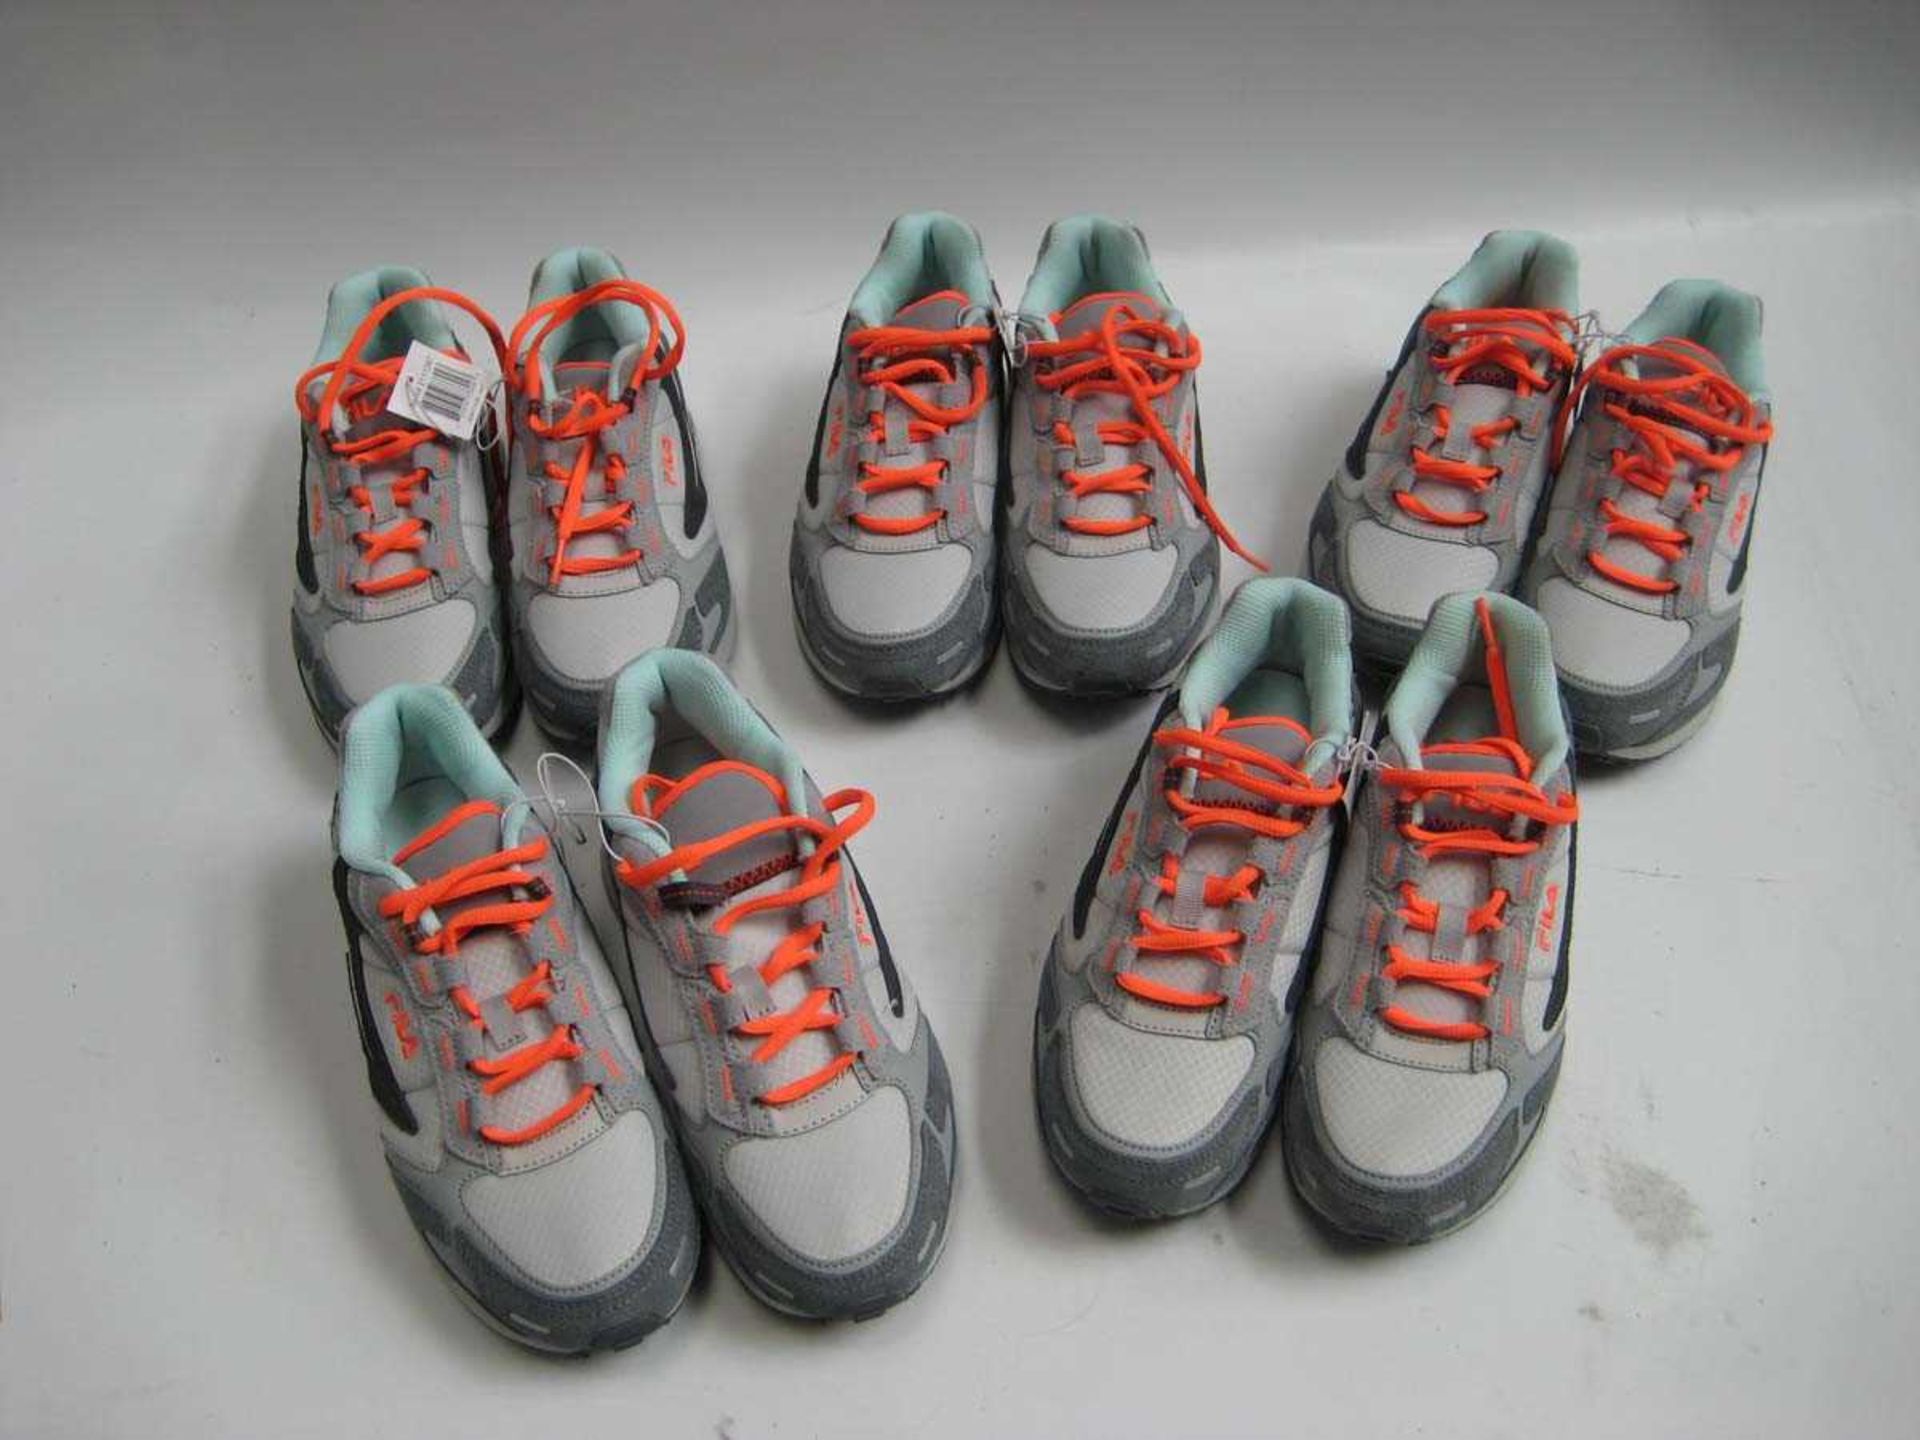 +VAT A bag containing 5x Pairs of Ladies Fila Trainers in Grey & Orange, 1x UK Size 4, 2x UK Size